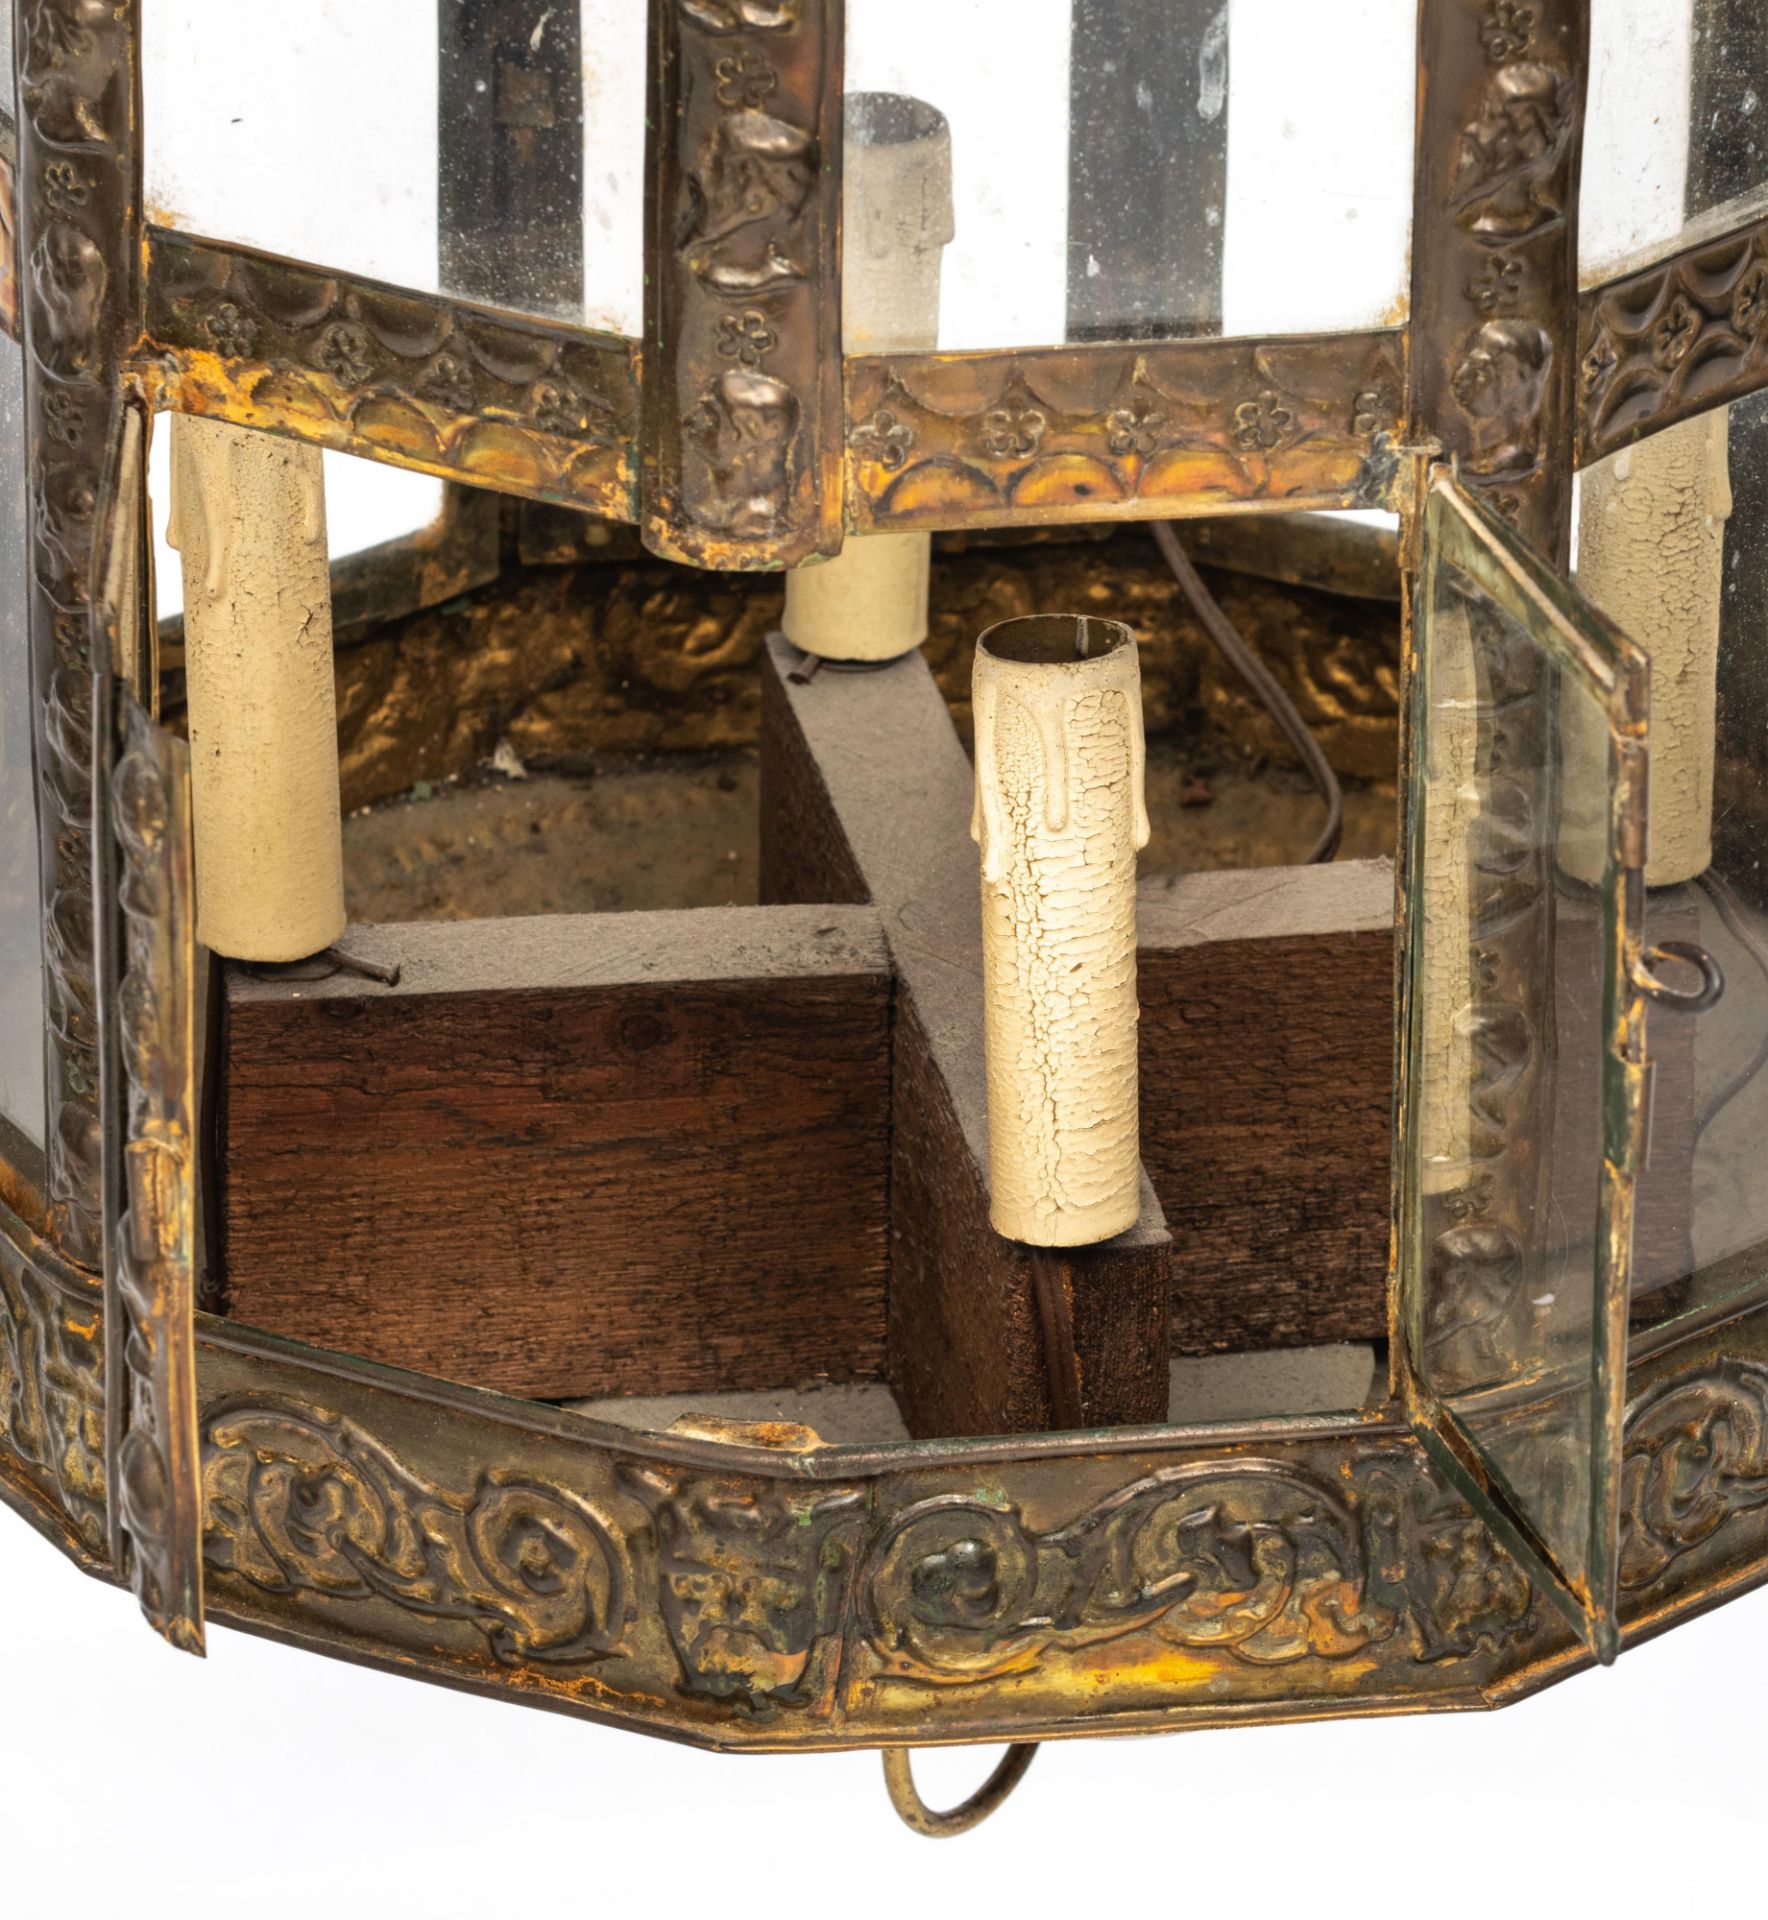 A Low-Countries brass lantern in a 17thC manner (possibly of the period or 19thC), H all-in 88 cm, , - Image 5 of 9